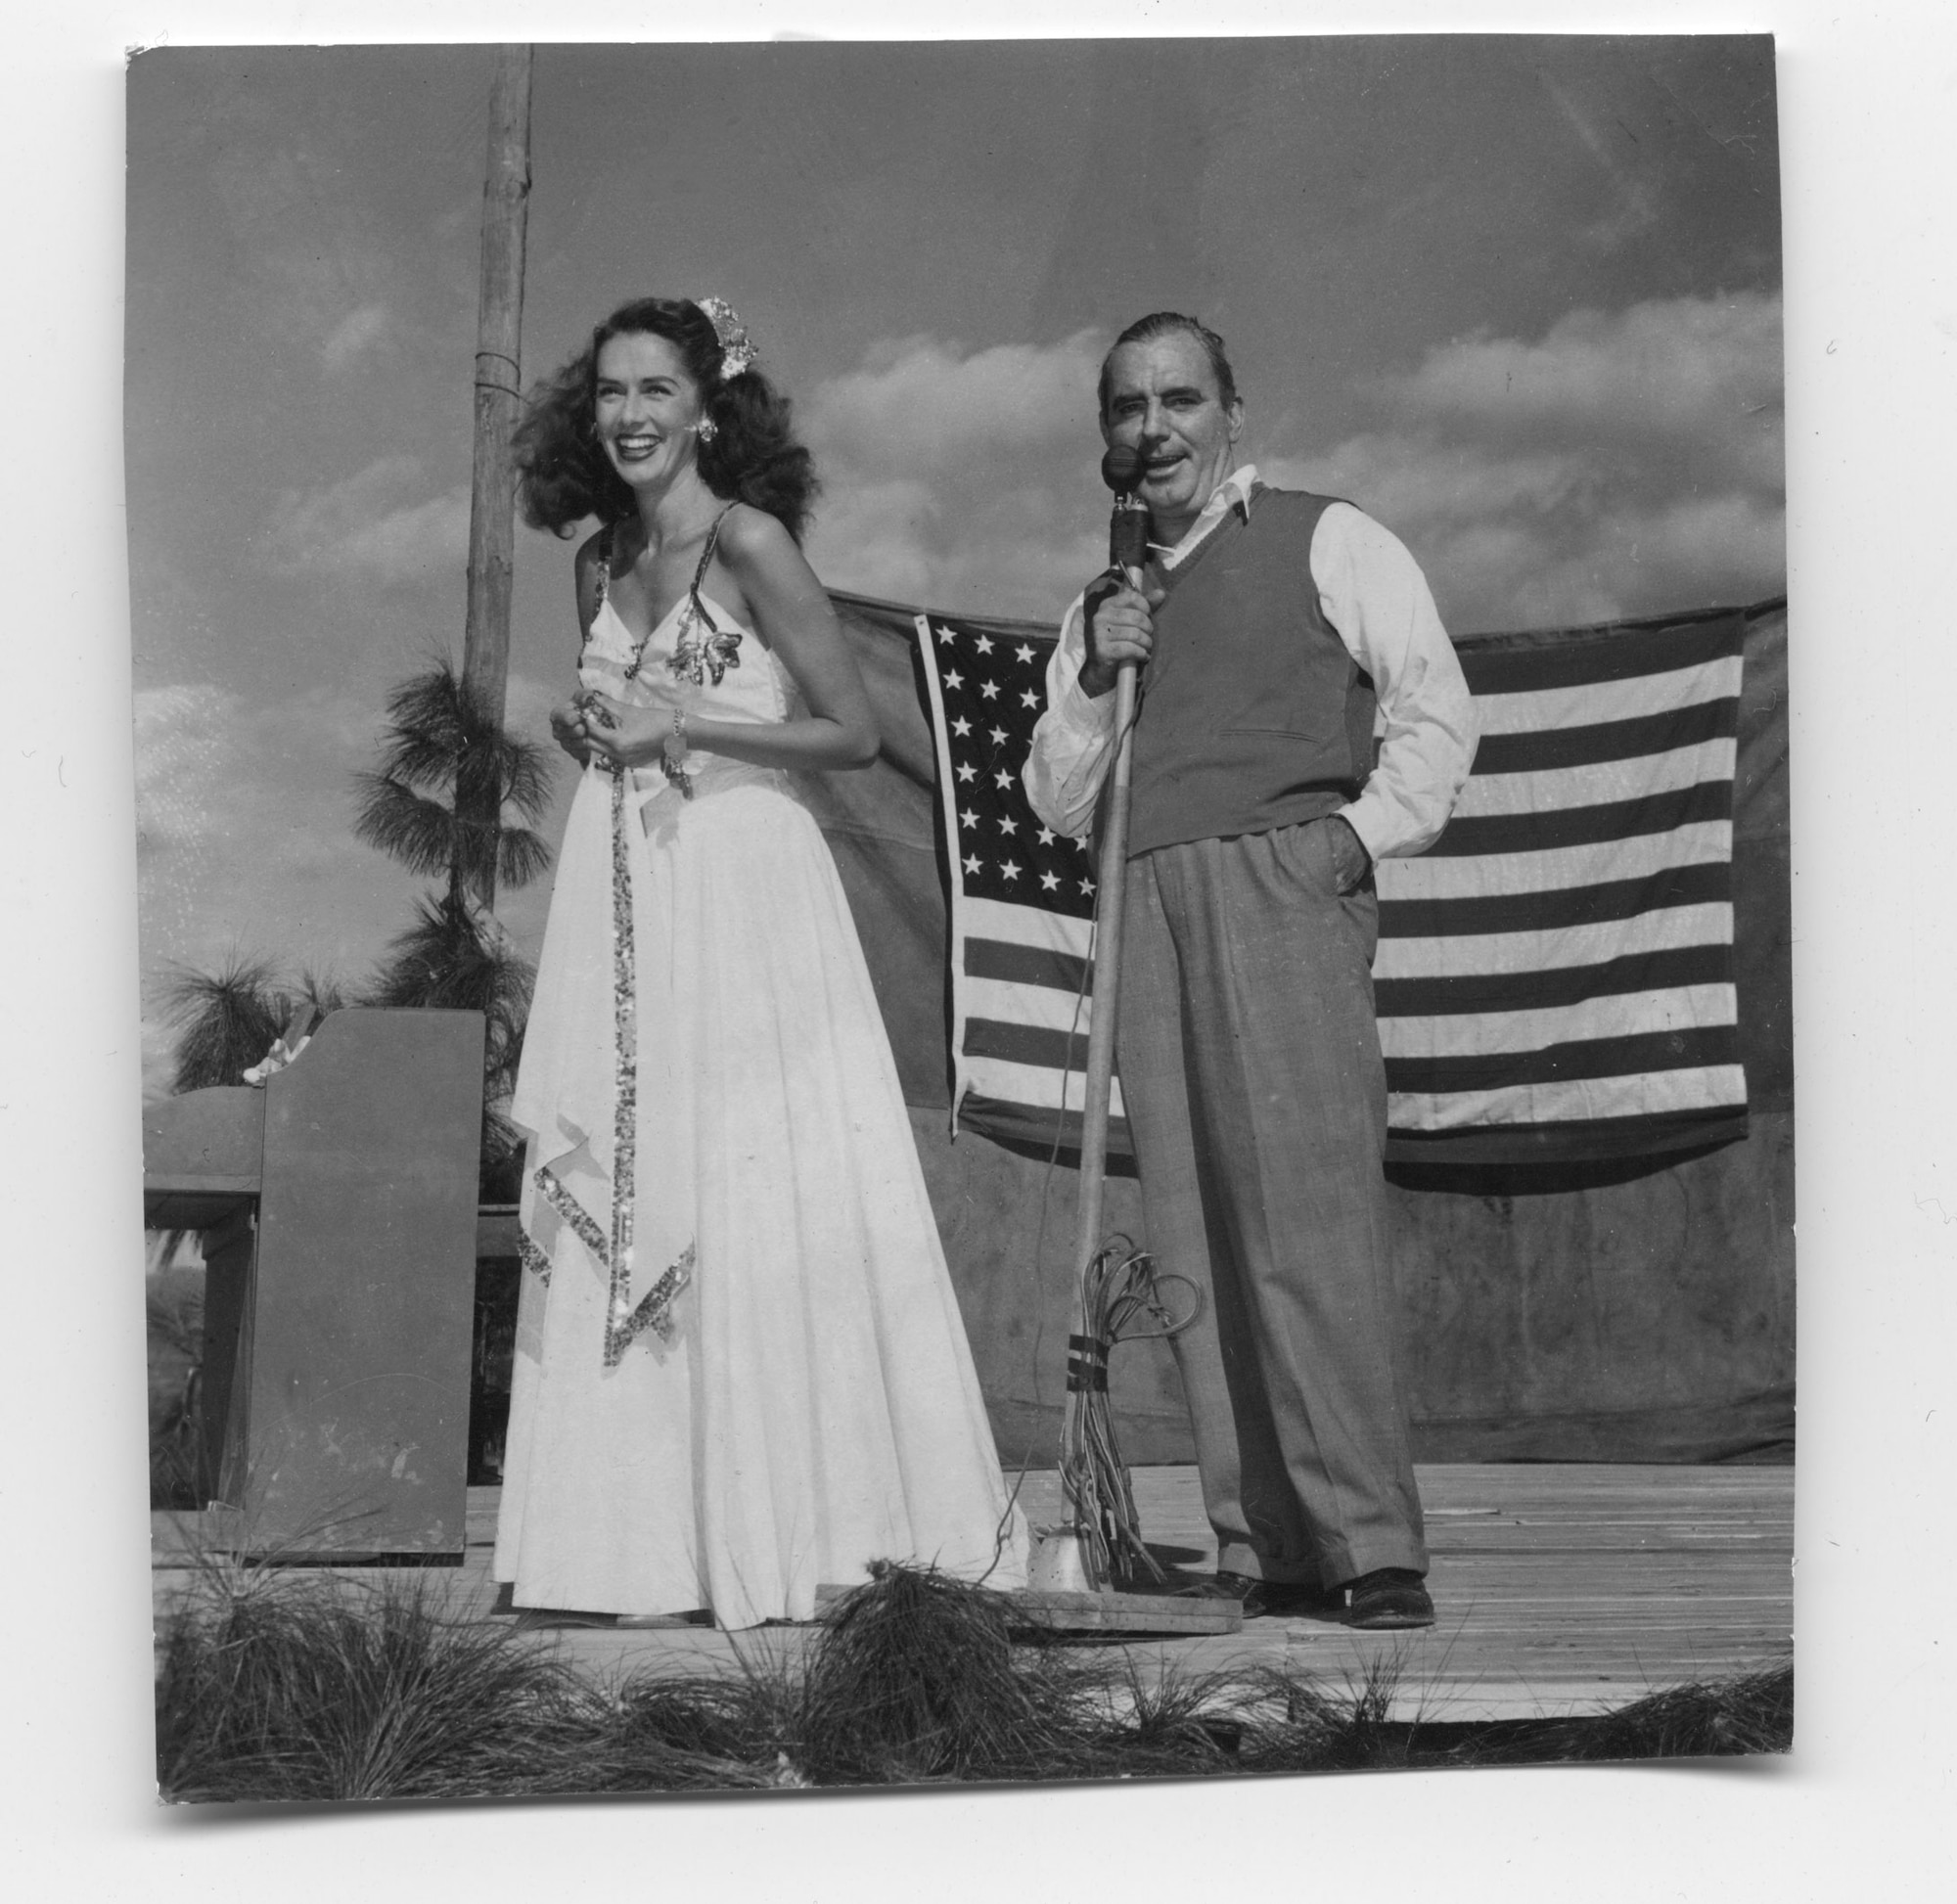 Jinx Falkenburg and Pat O’Brien, co-leaders of USO tour to the CBI, late 1944. Based on multiple sources, this picture appears to have been taken in Chanyi, China, site of the 35th PRS headquarters.